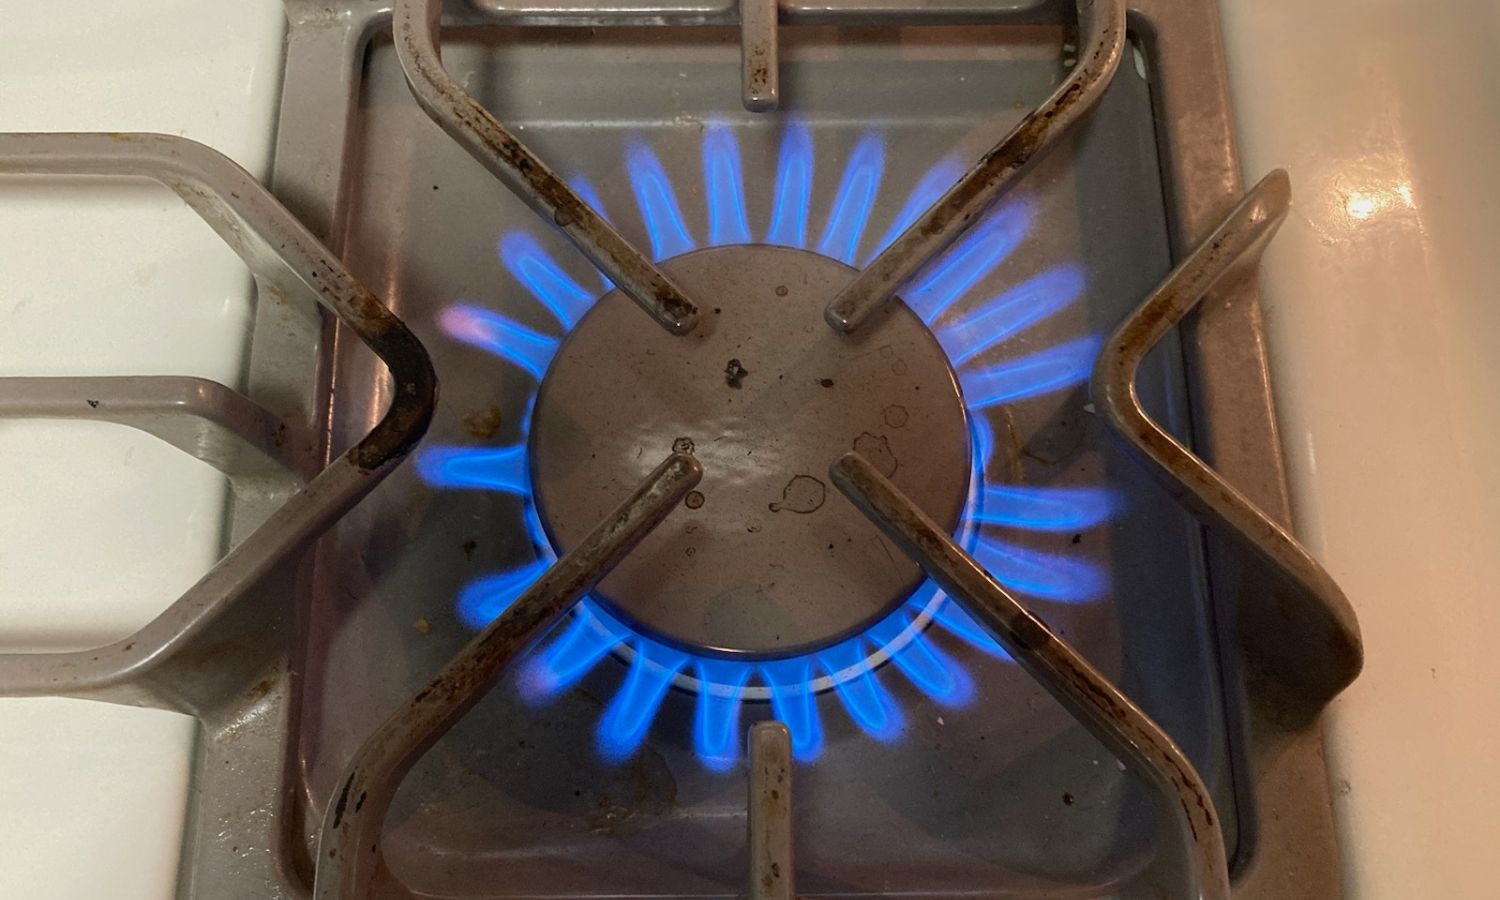 Are Gas Stoves Going to Be Banned? Here's What You Need to Know